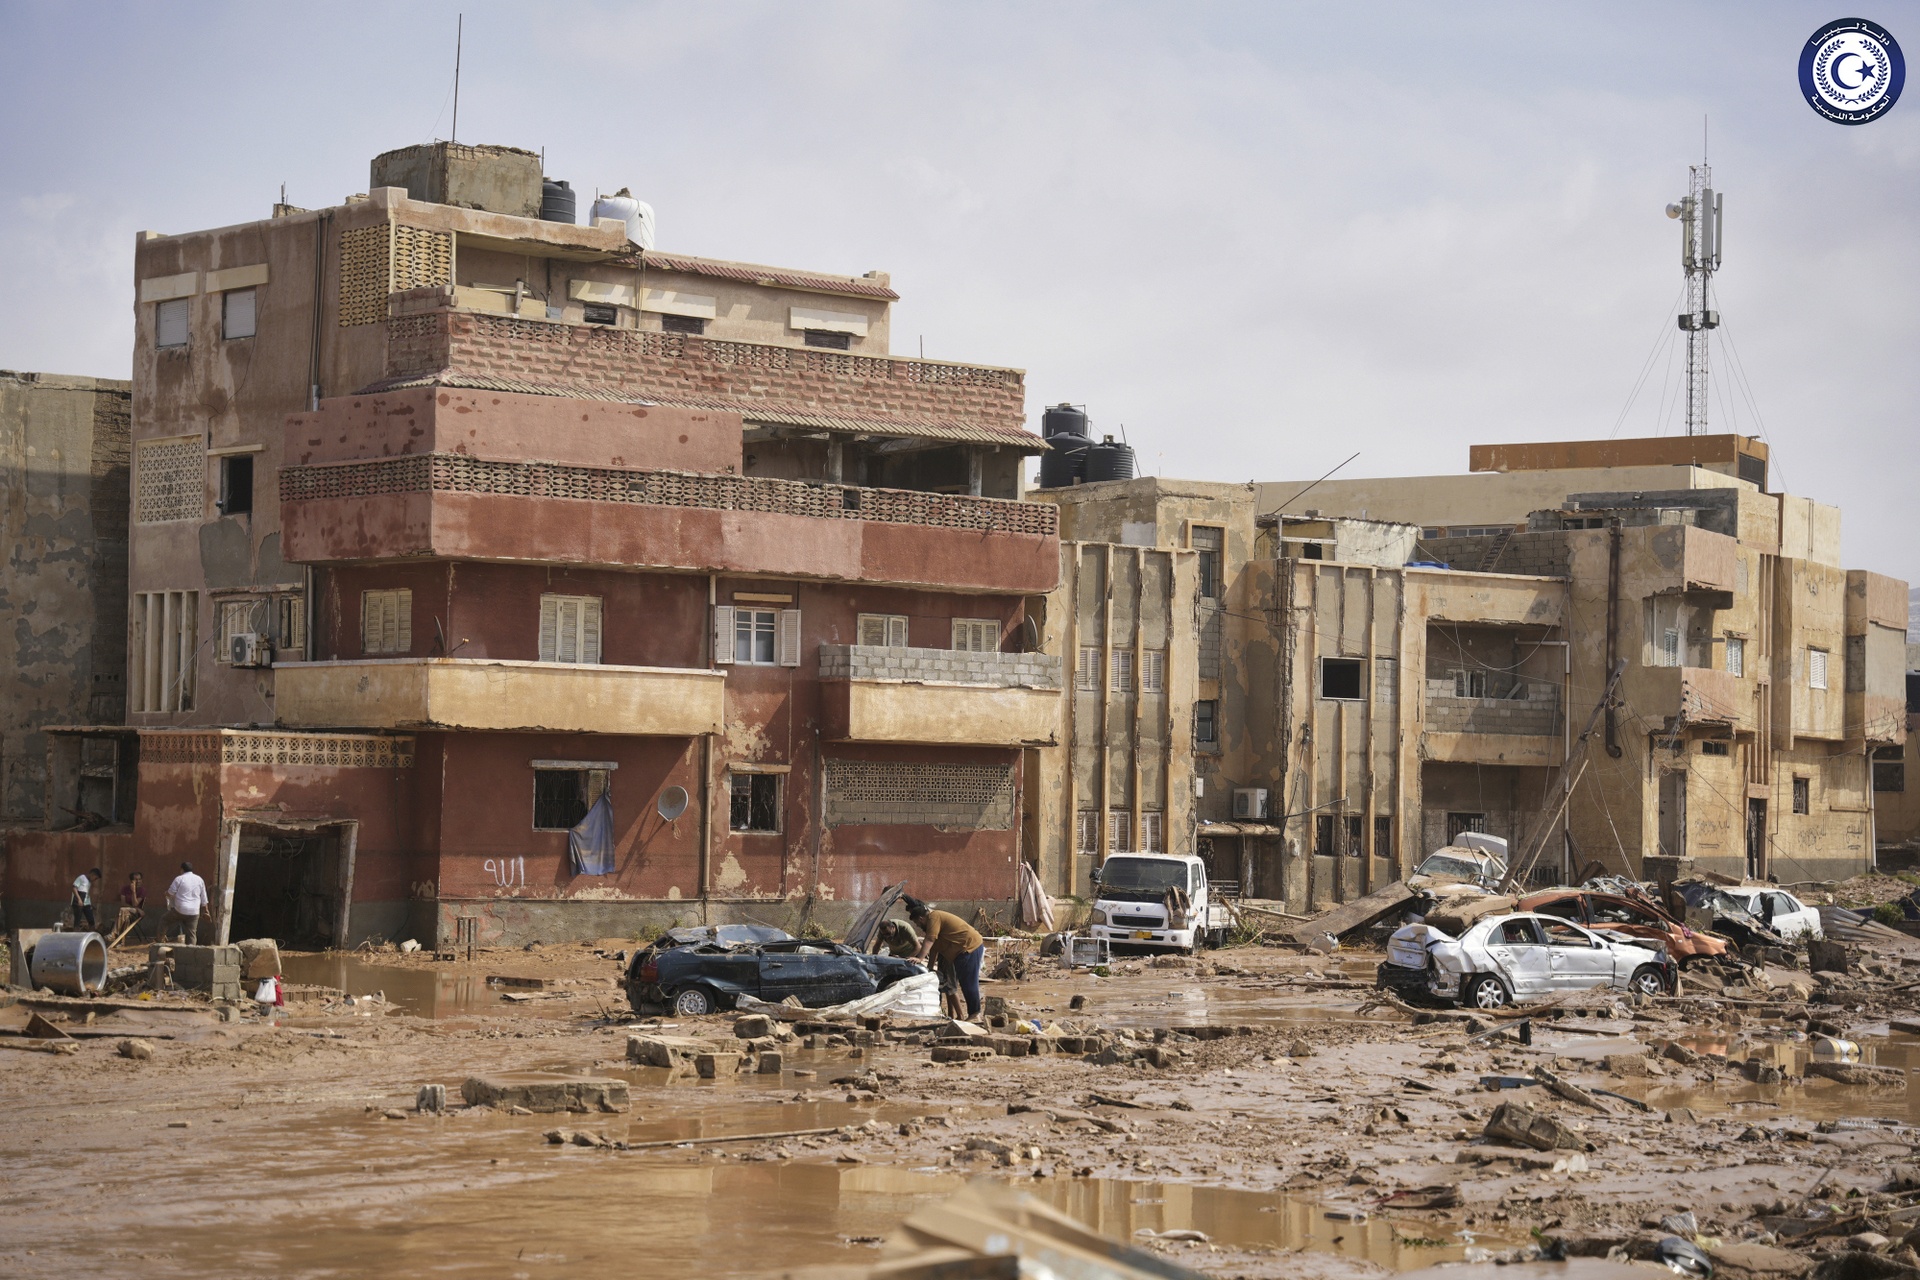 Cars and rubble in Derna, Libya.